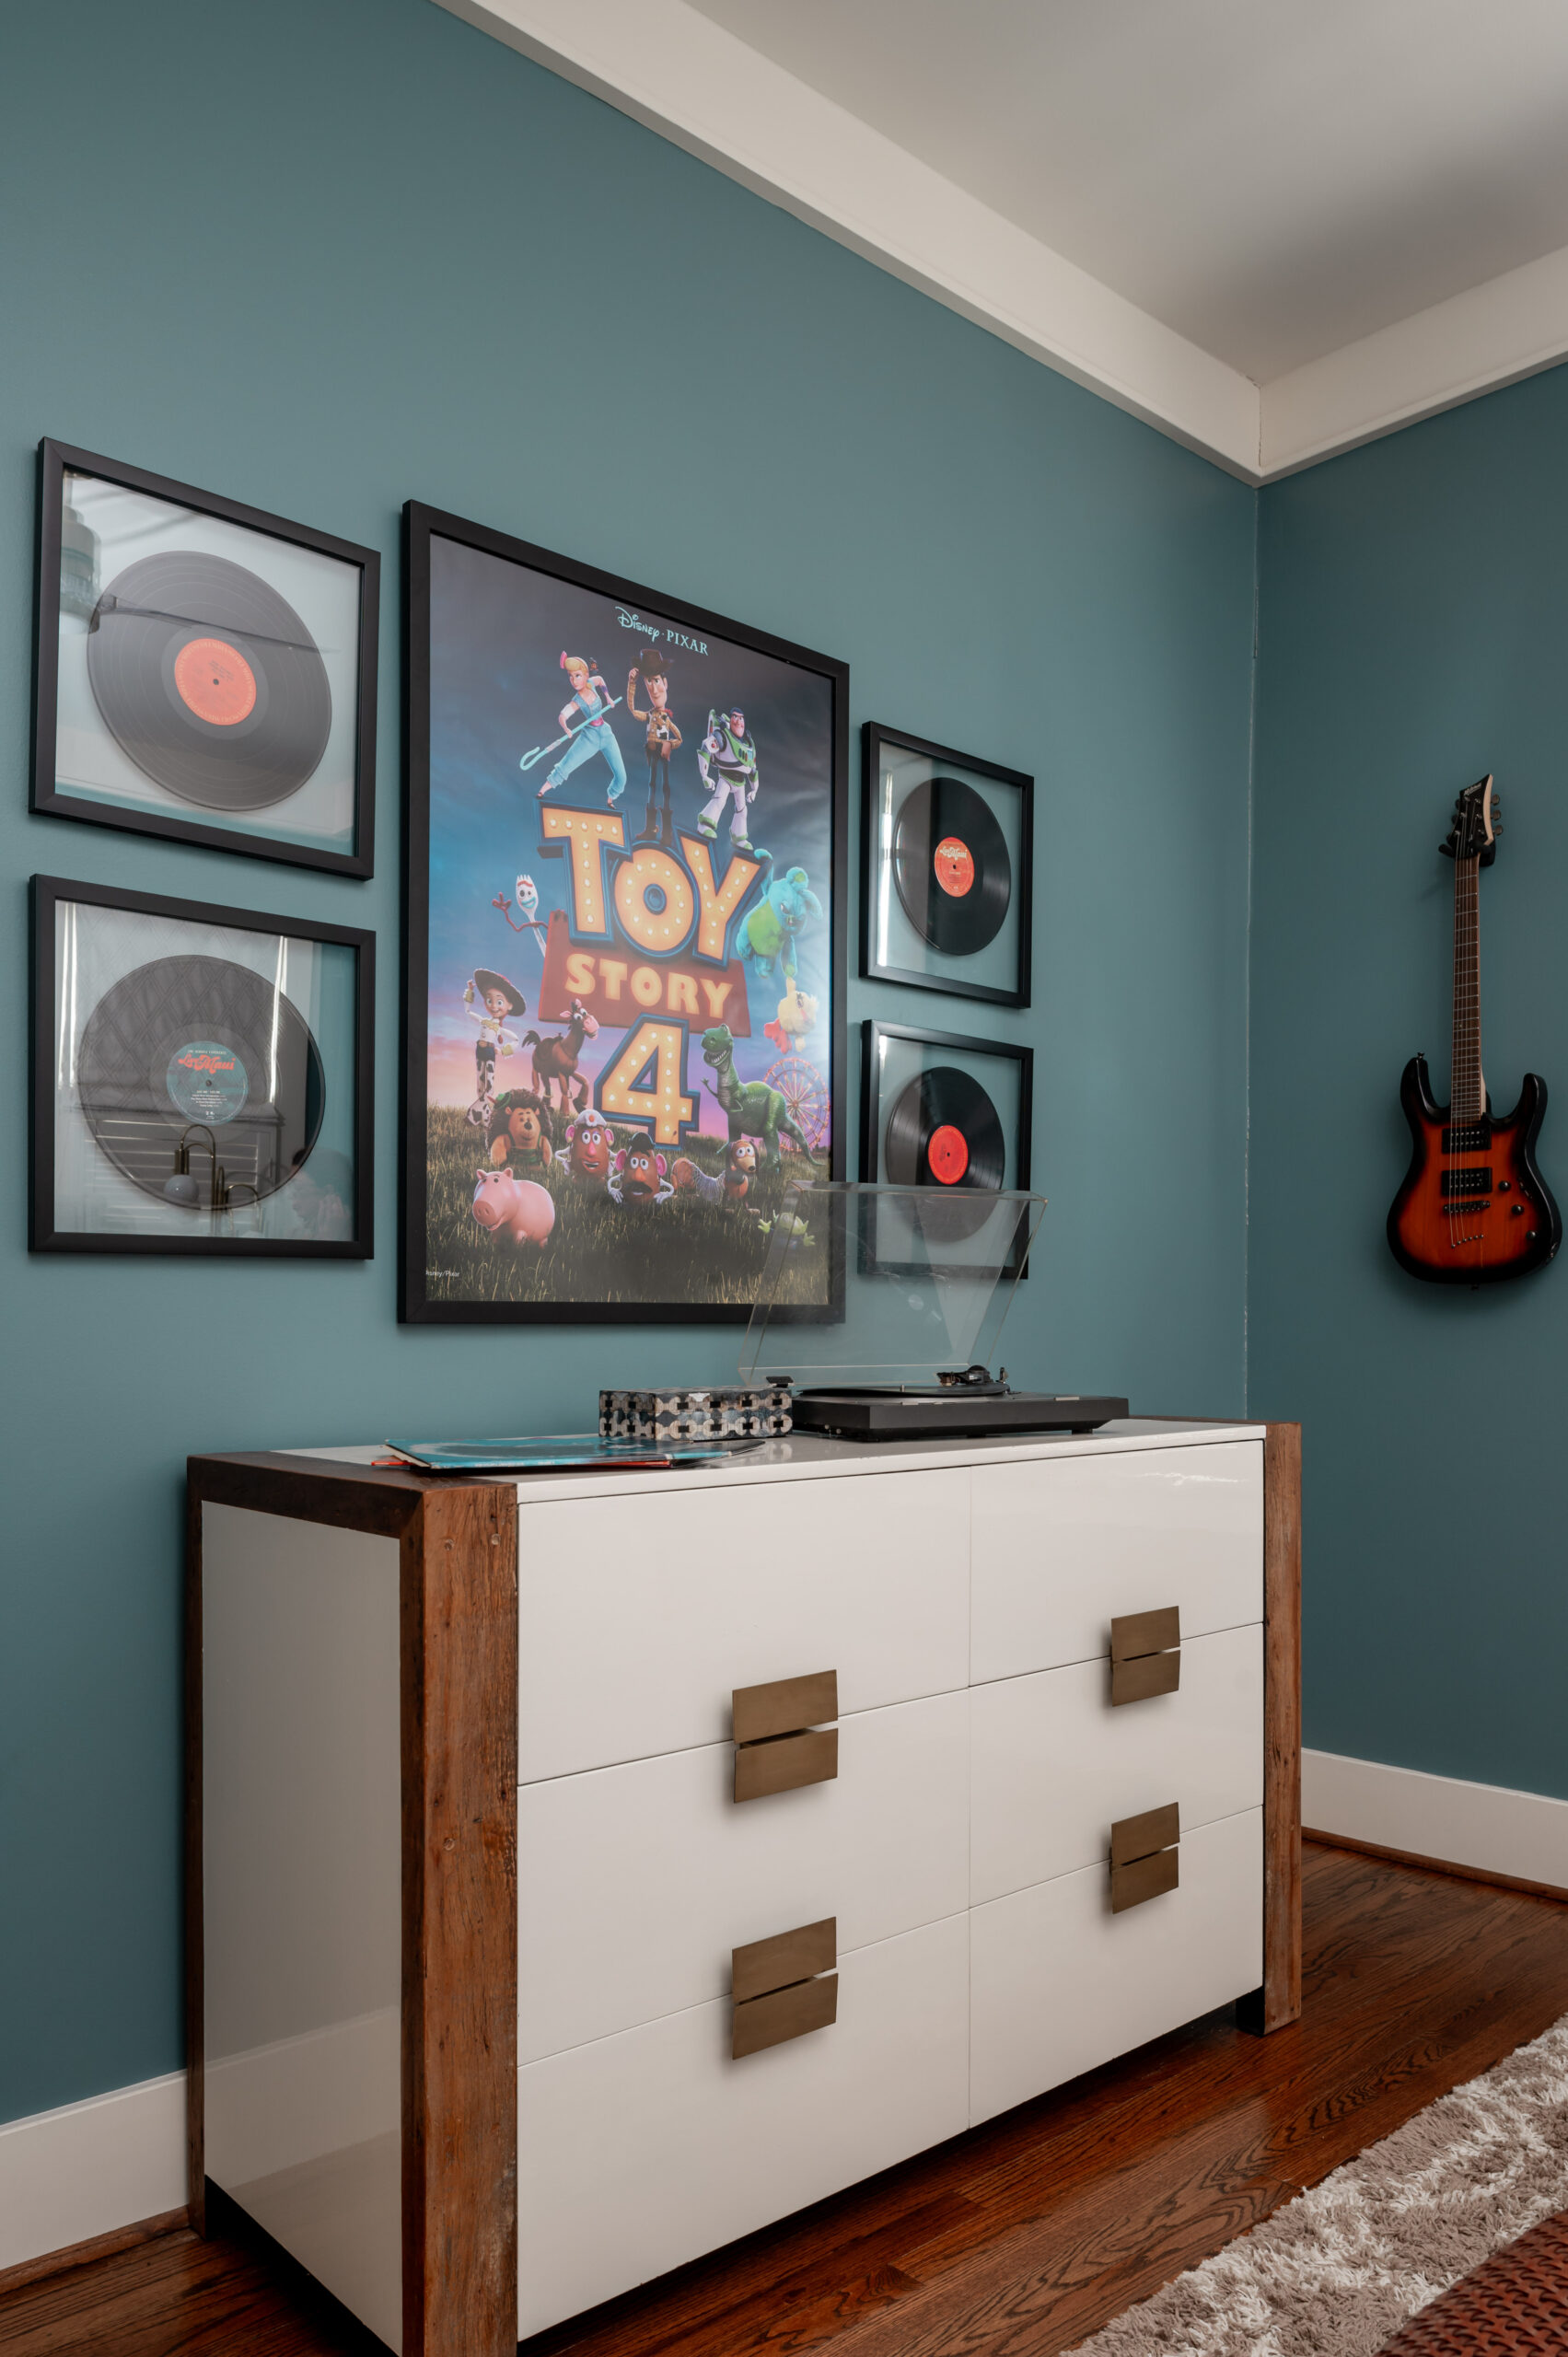 White wooden dresser with Toy Story 4 poster hanging on the wall